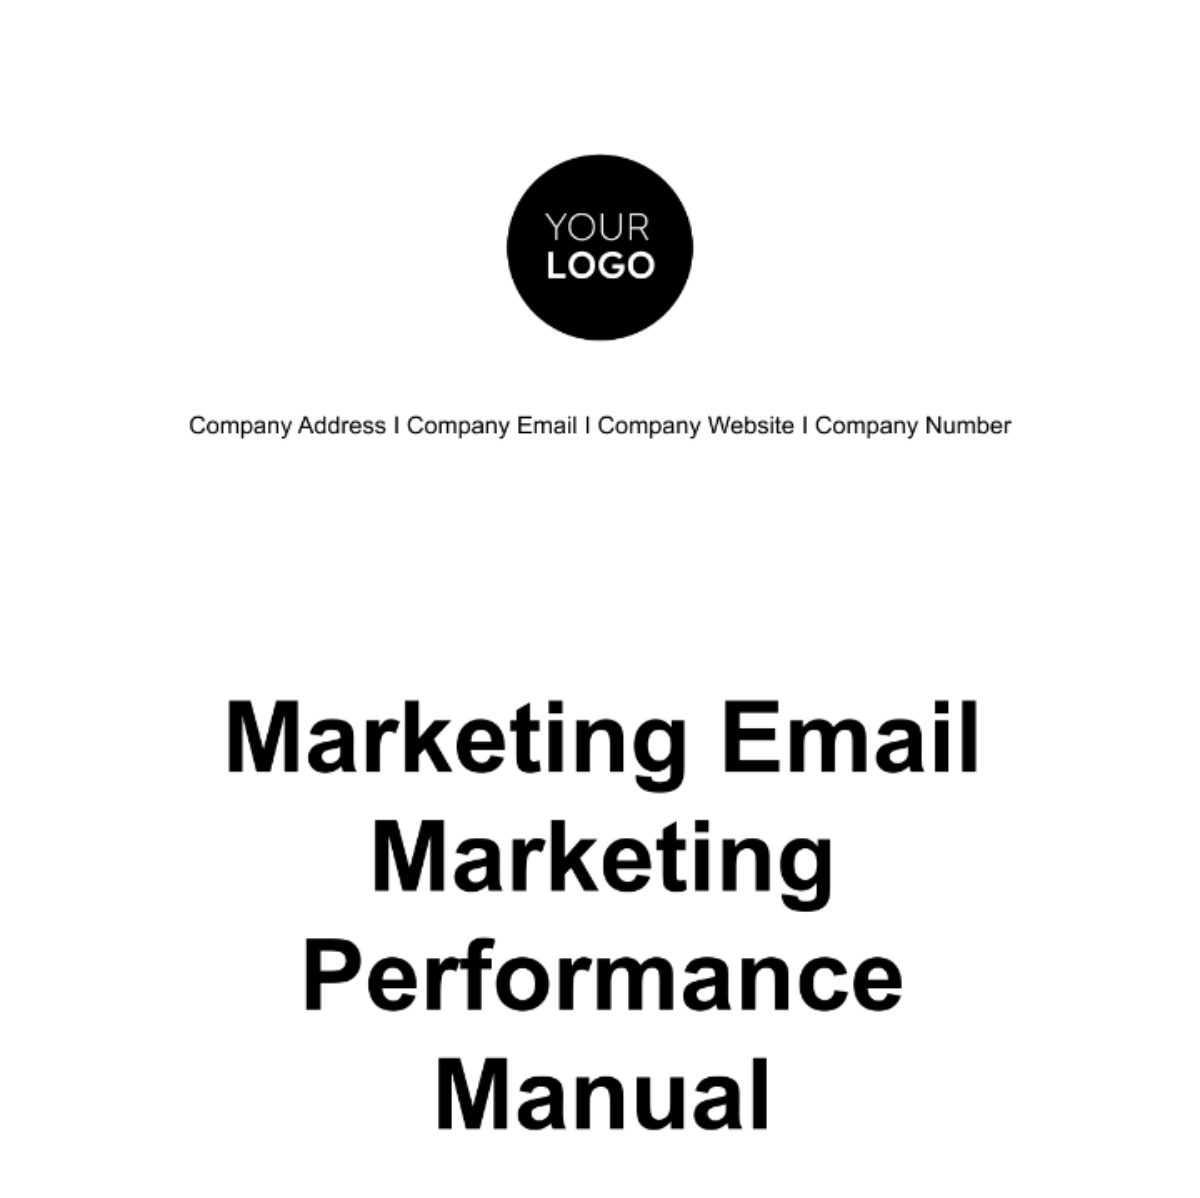 Email Marketing Performance Manual Template